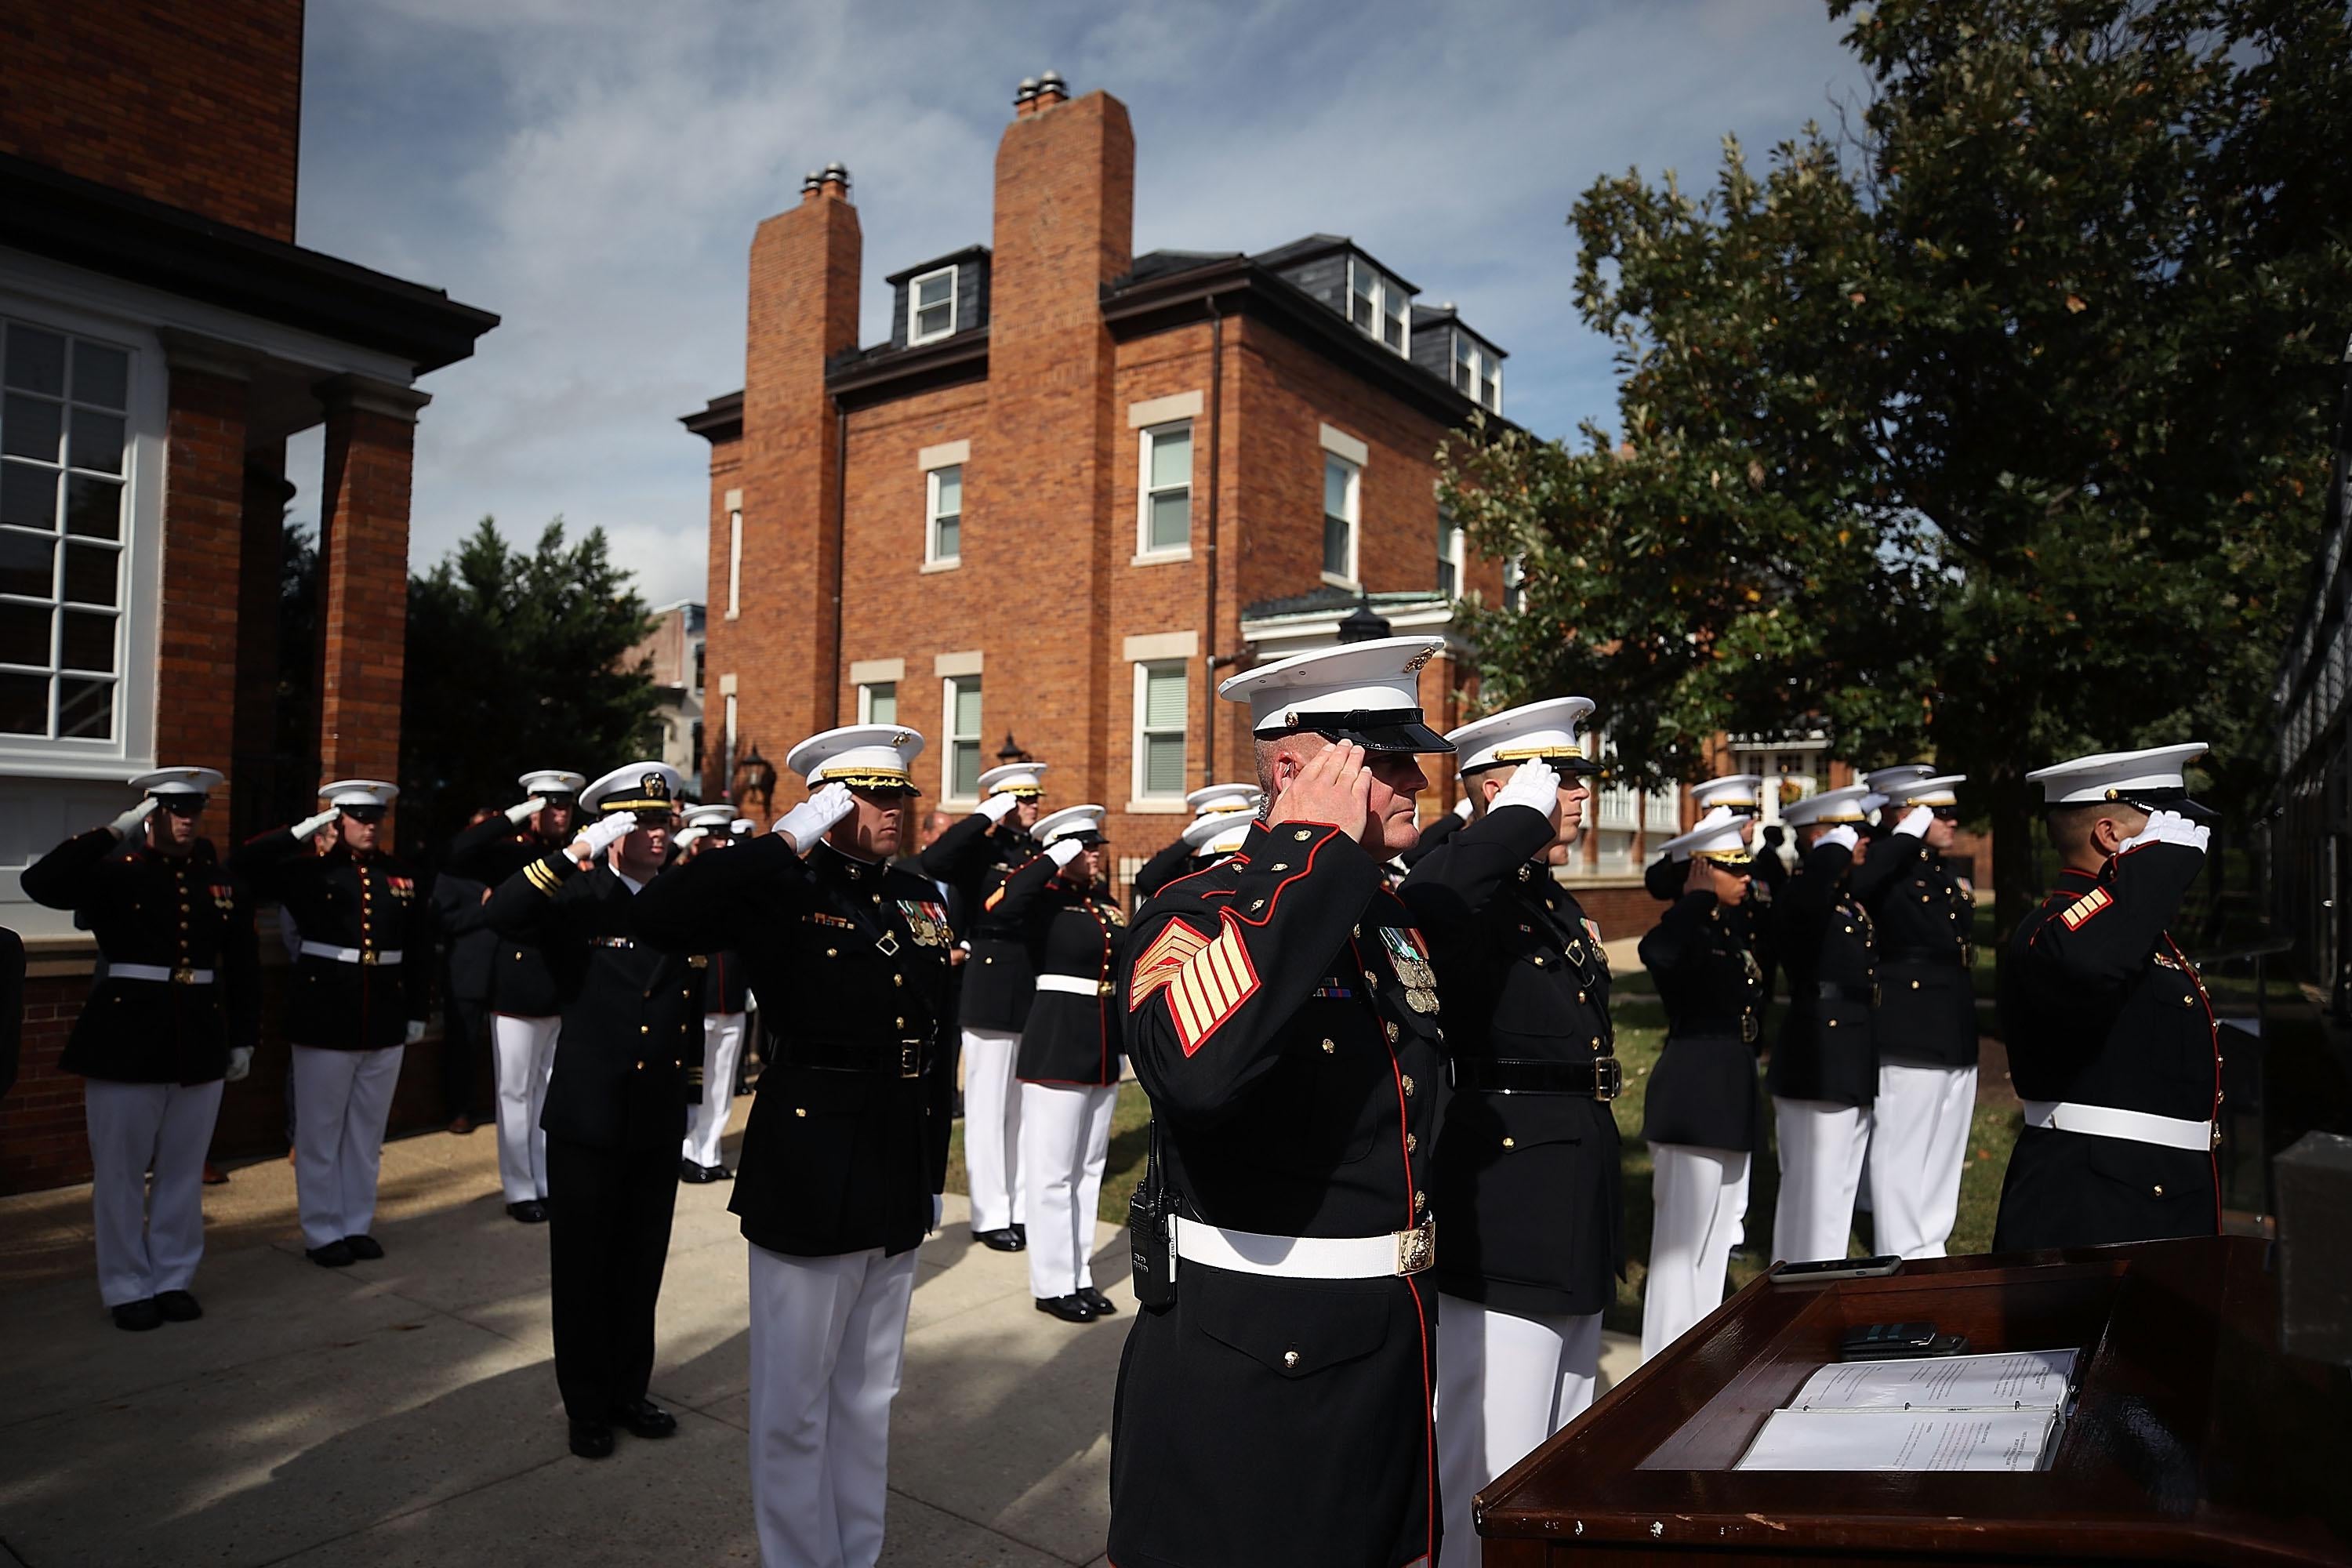 WASHINGTON, DC - OCTOBER 23:US Marines salute during a ceremony to commemorate the anniversary of the 1983 bombing of the Marine barracks in Beirut, Lebanon, at the Marine barracks on October 23, 2017 in Washington, DC. 34 years ago today terrorist detonated two truck bombs at a building that housed US troops, killing 220 Marines, 18 sailors and 3 soldiers.  (Photo by Mark Wilson/Getty Images)